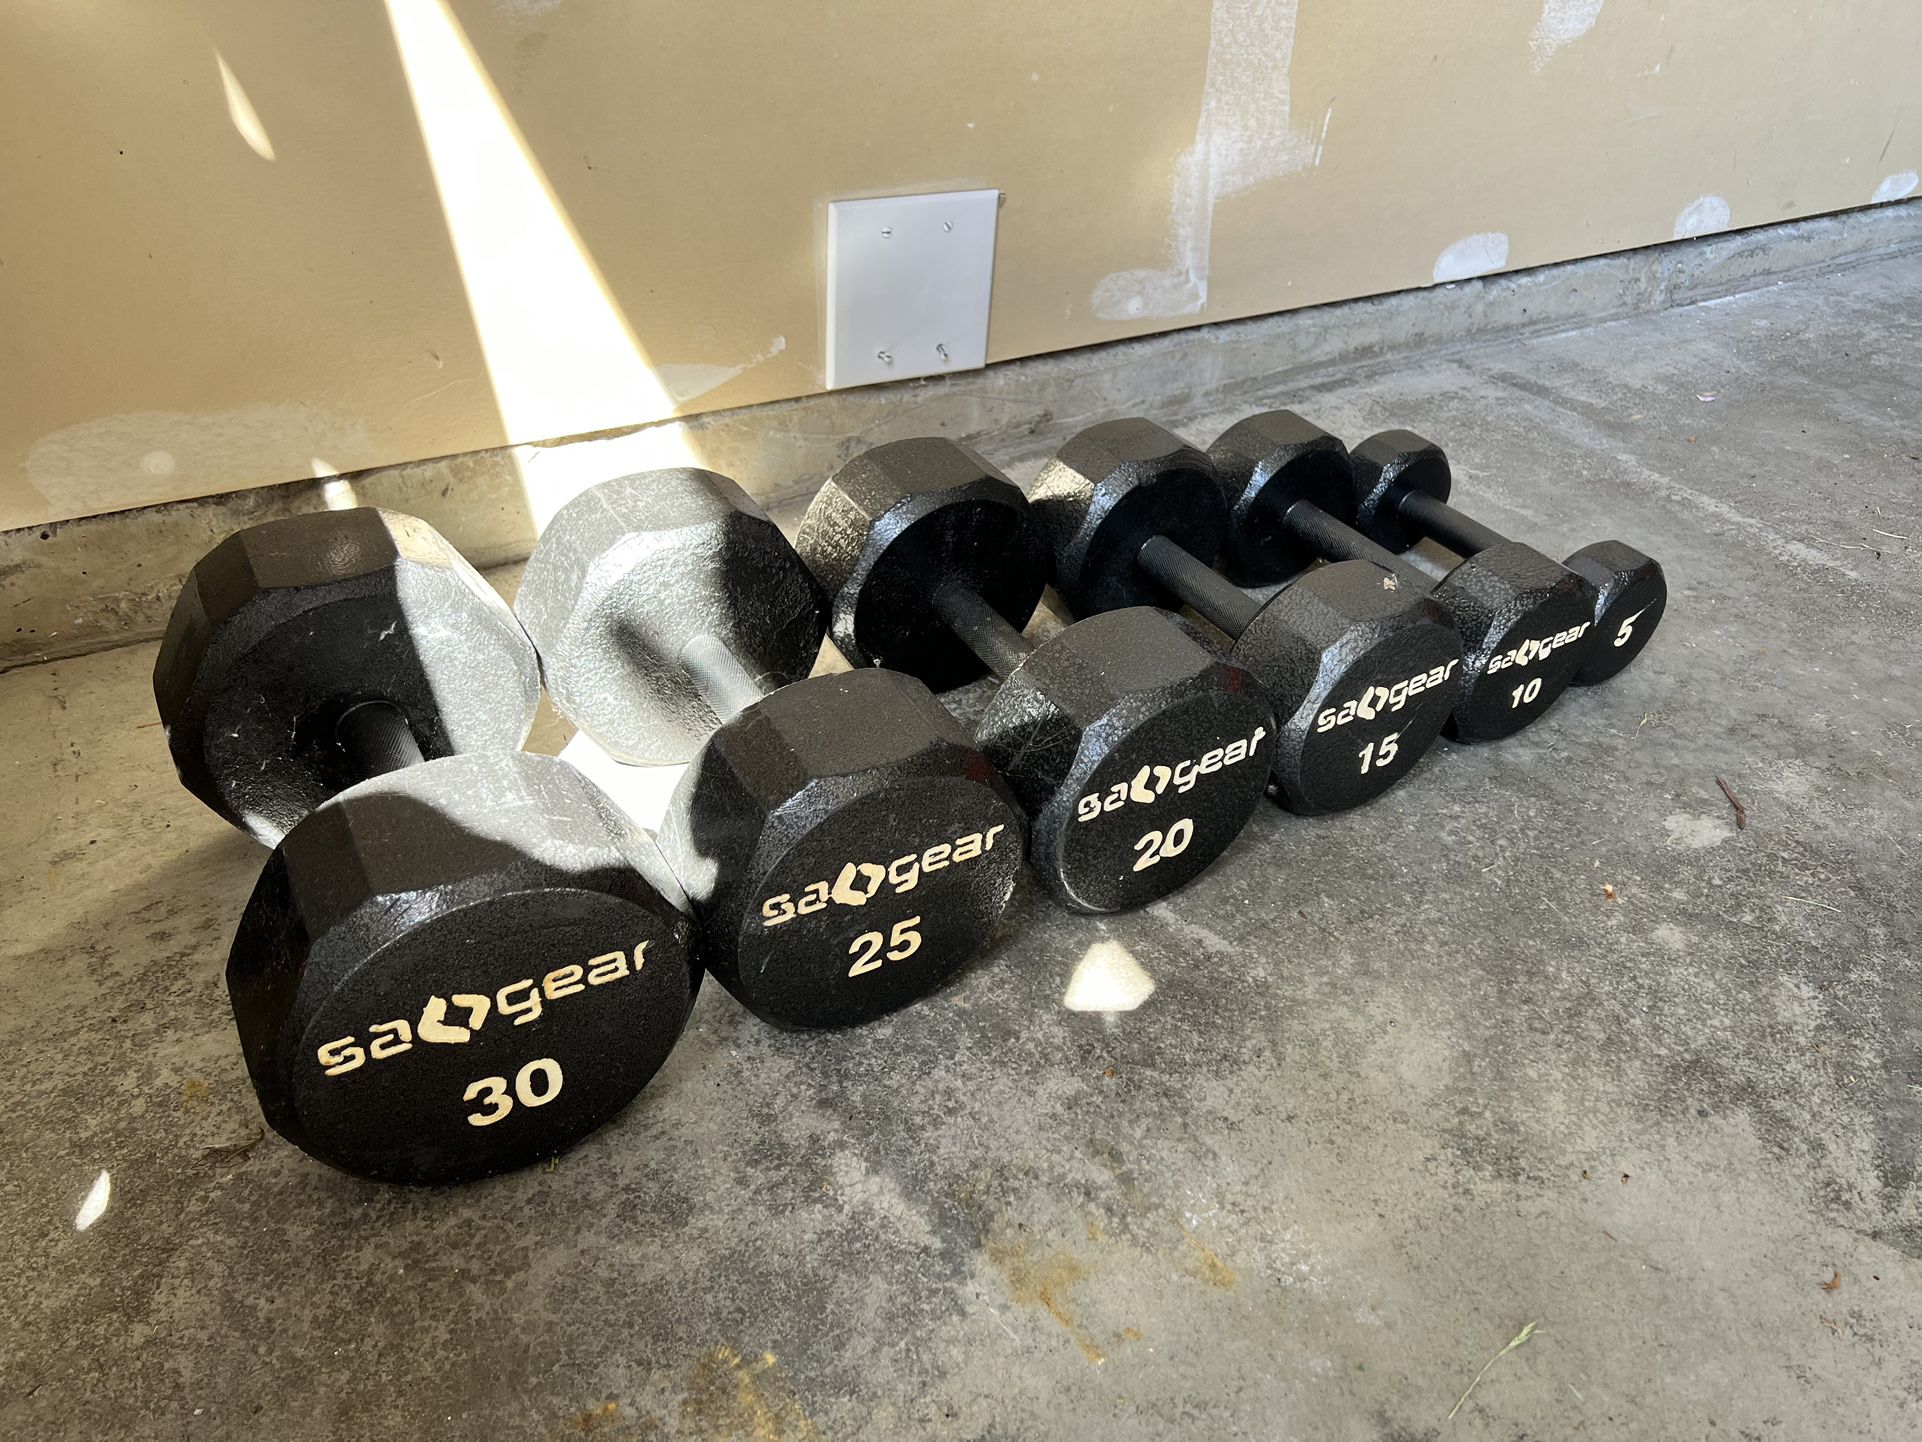 Dumbbell Set of 5-30 lbs (one of each weight)